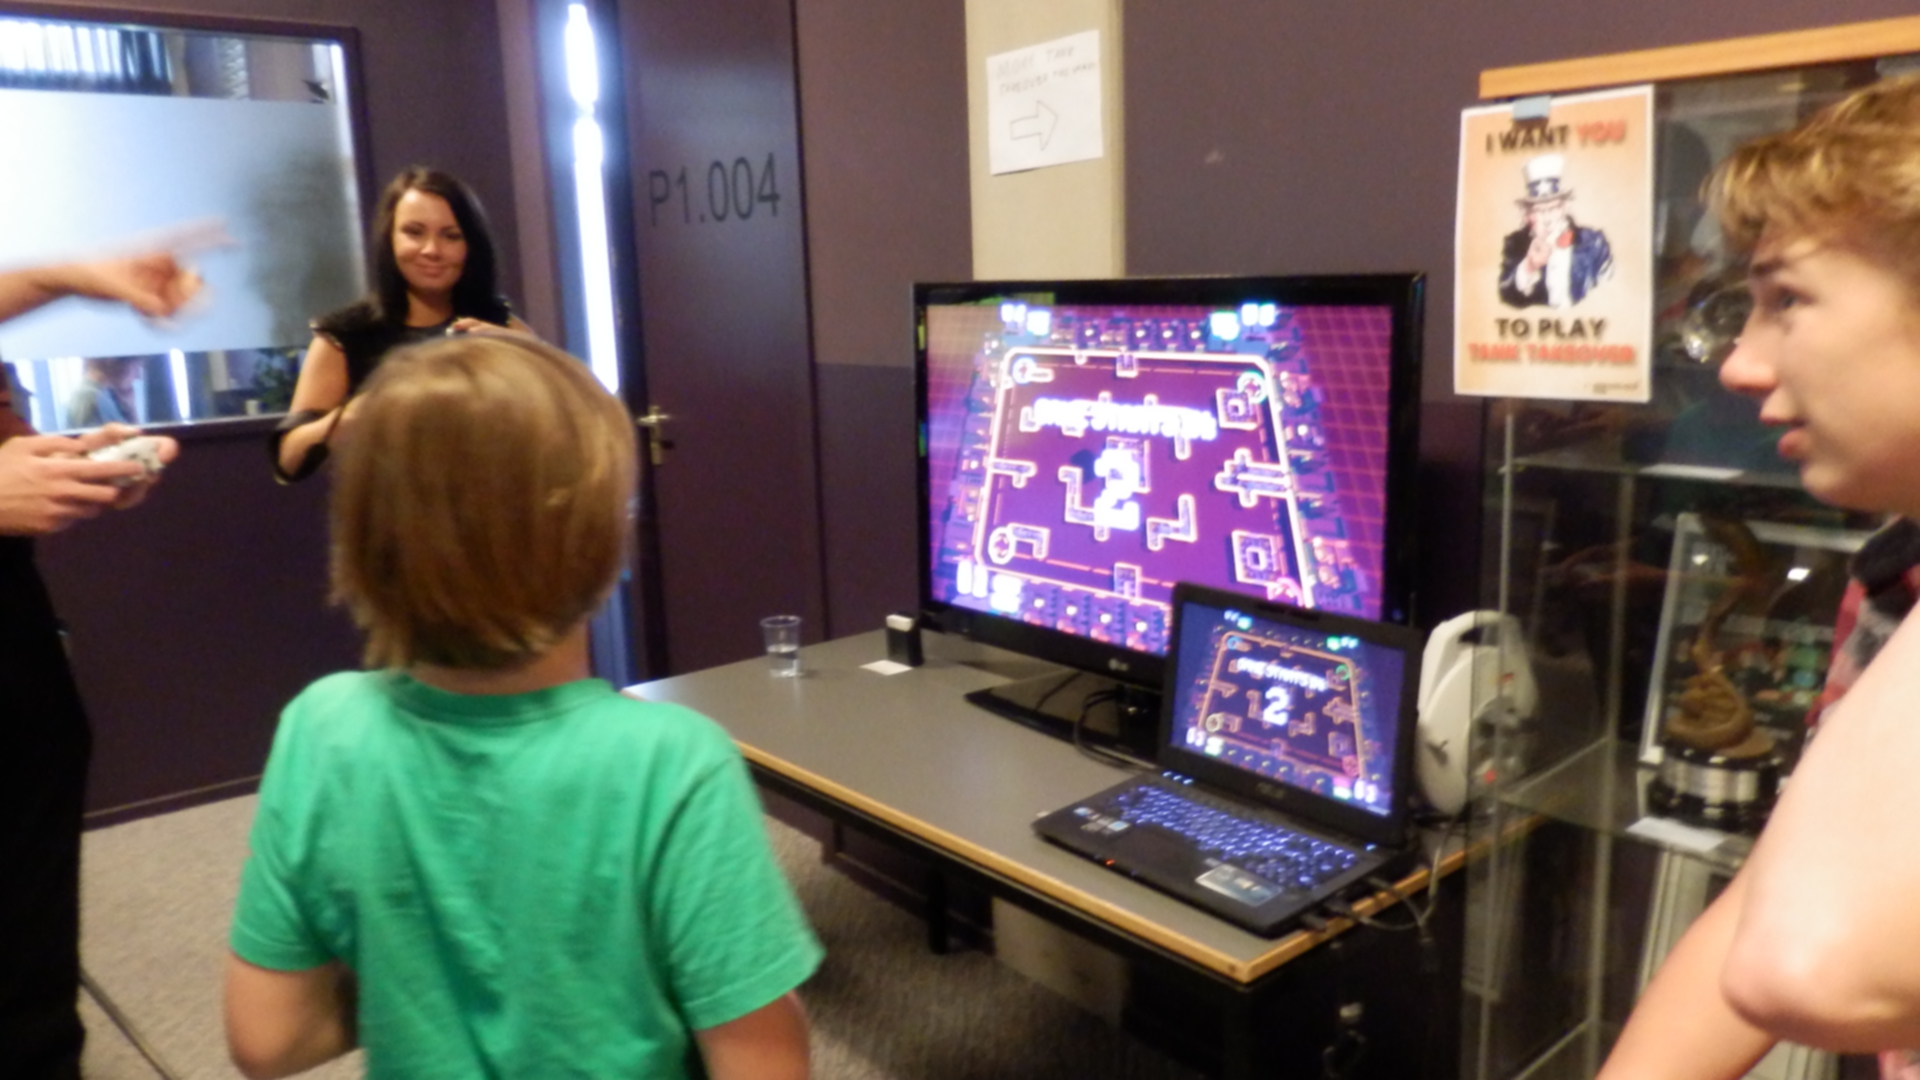 The game being played at the release day at the end of the course.